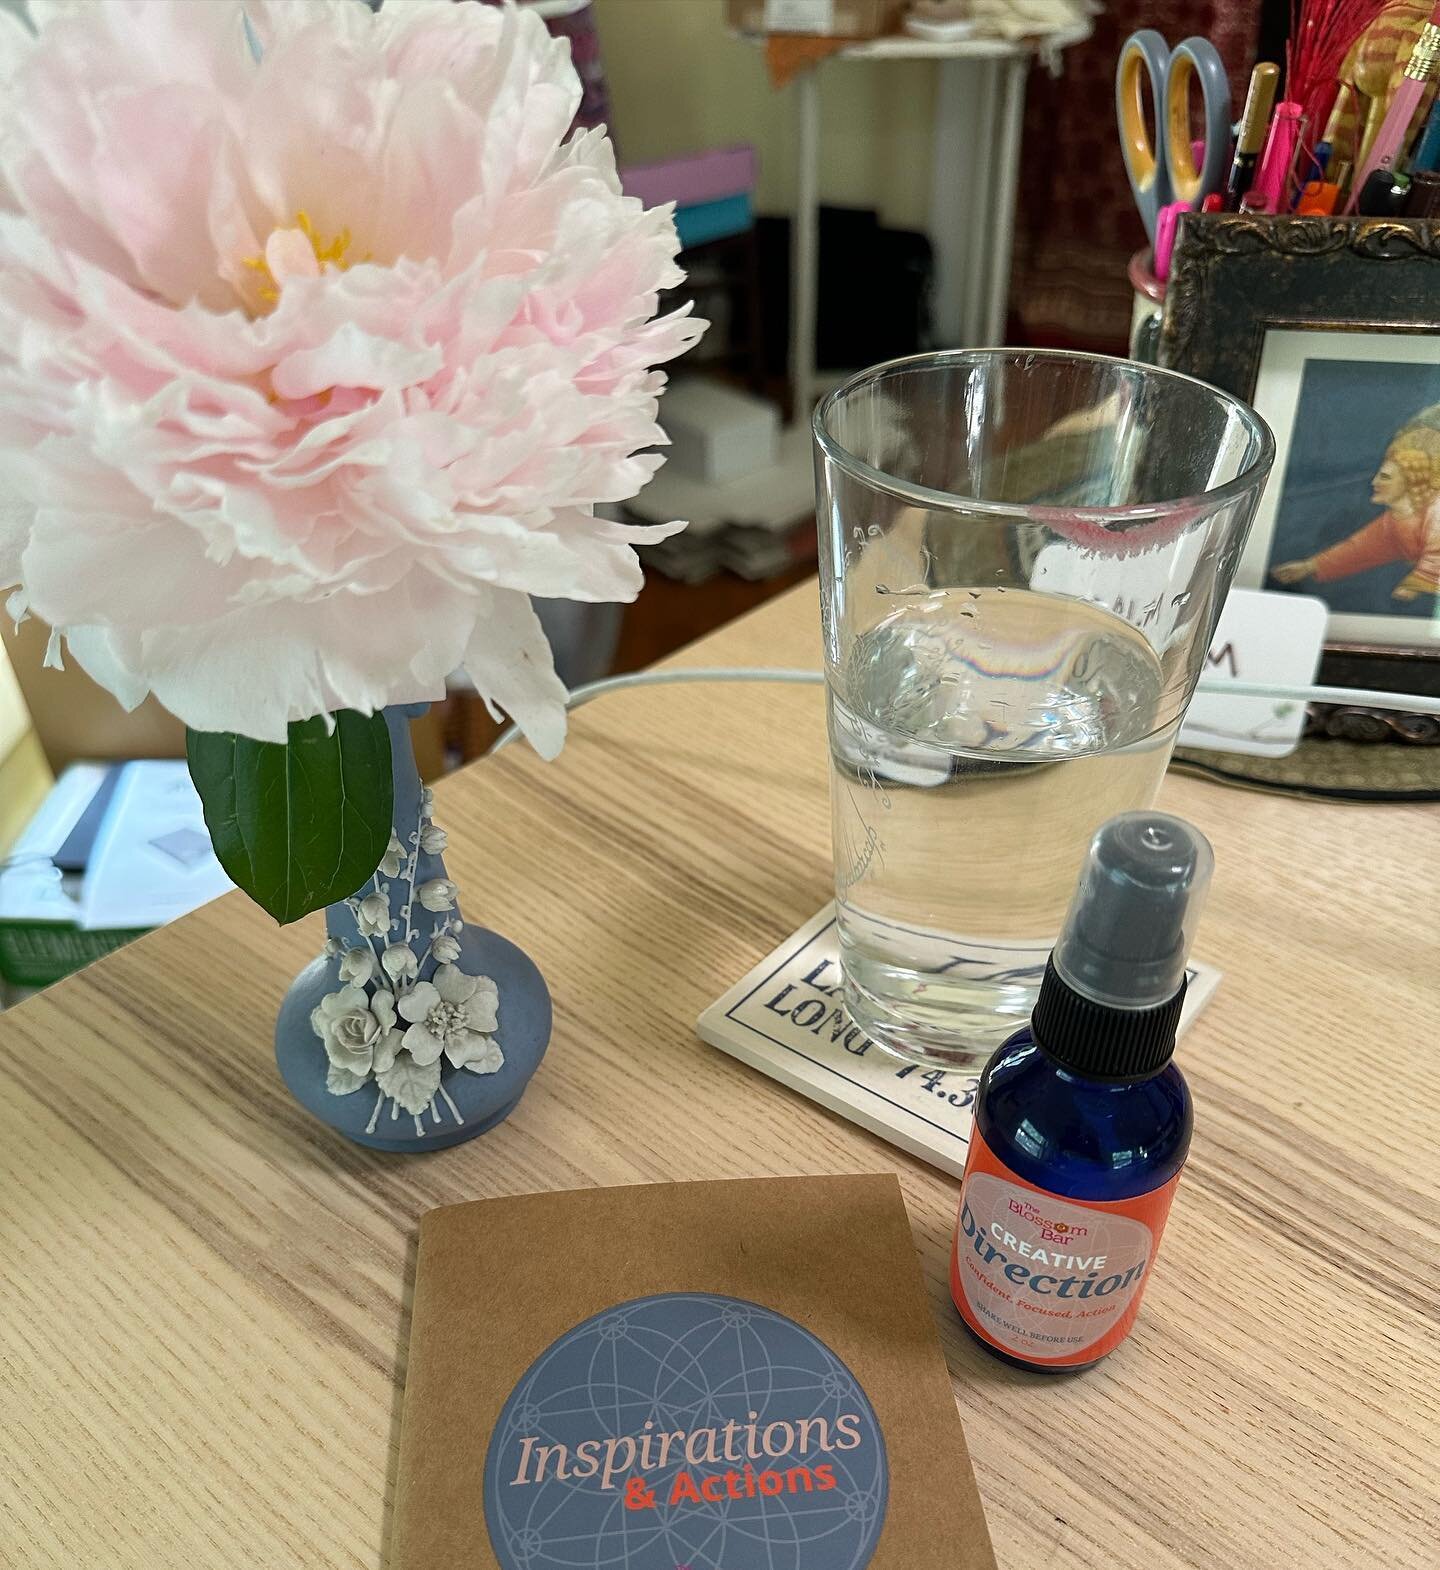 Webinar prep! Essential oil spray to help me stay focused and tuned in, notebook to hold inspirations, and feminine beauty from my garden 🌸💕

Want some ways to bring ease and joy into your work day? Book a private session for aromatherapy and/or fl